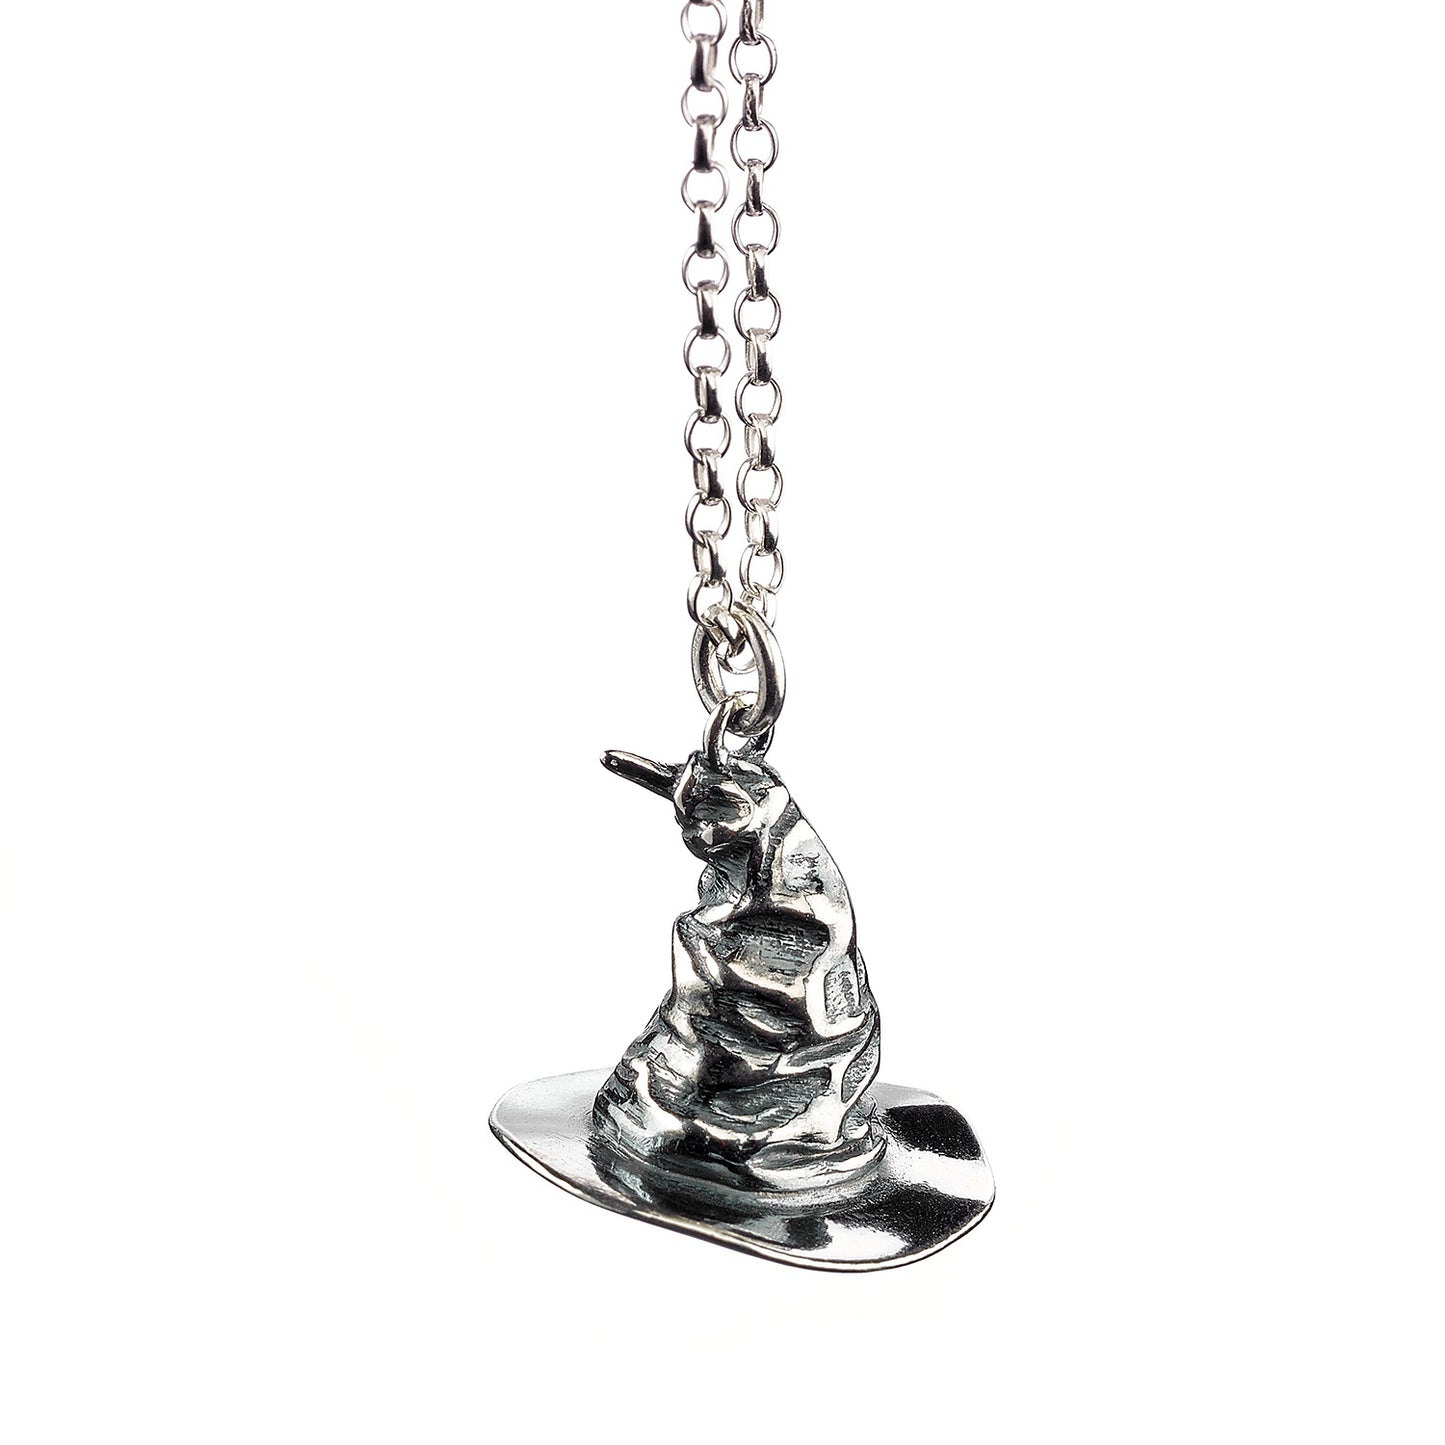 Harry Potter Sorting Hat Necklace - Sterling Silver